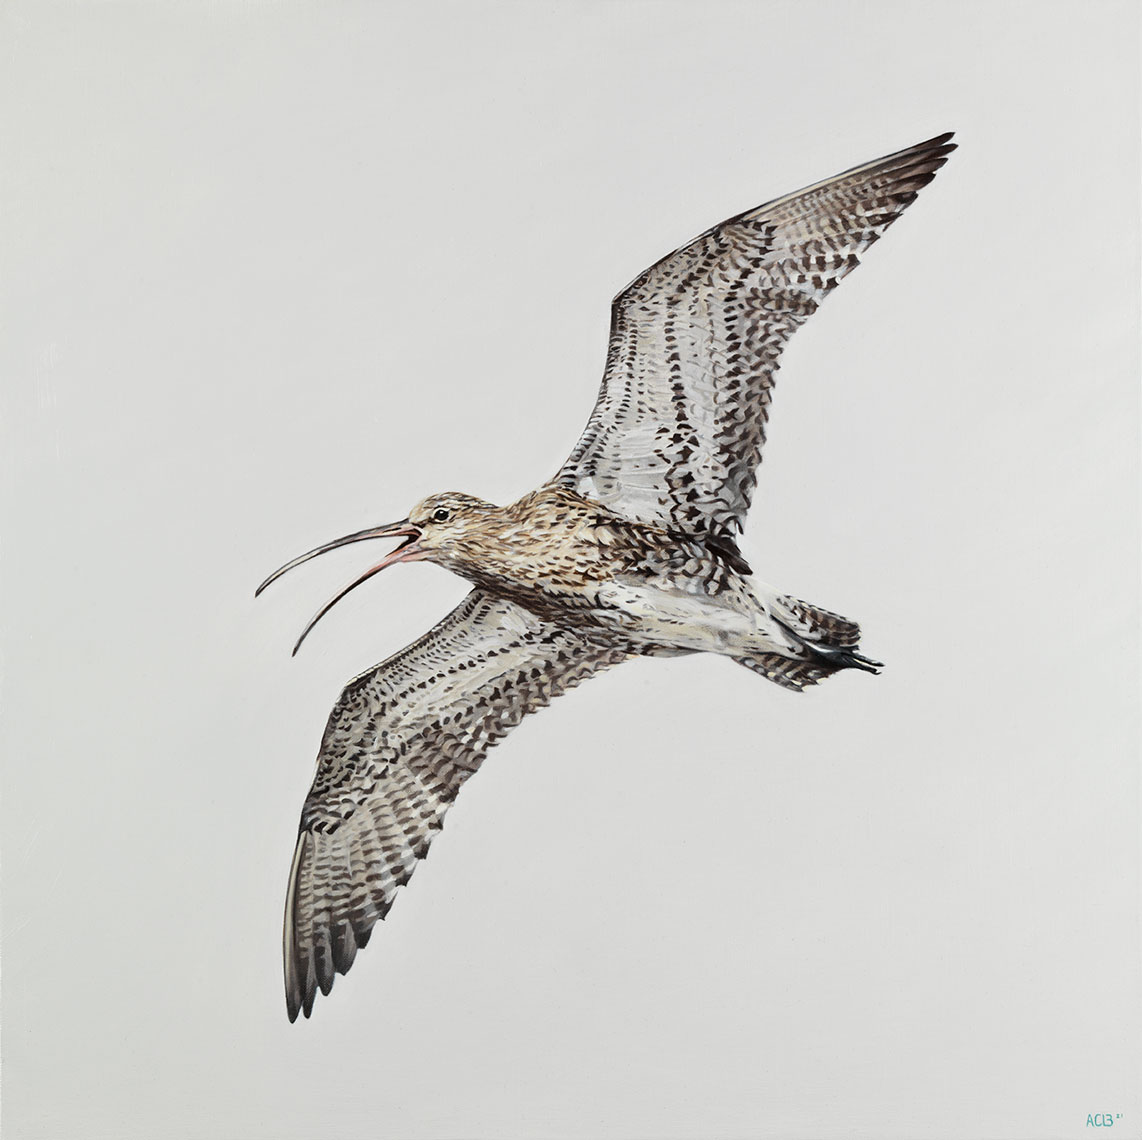 curlew bird flying oil painting by anna clare lees-buckley